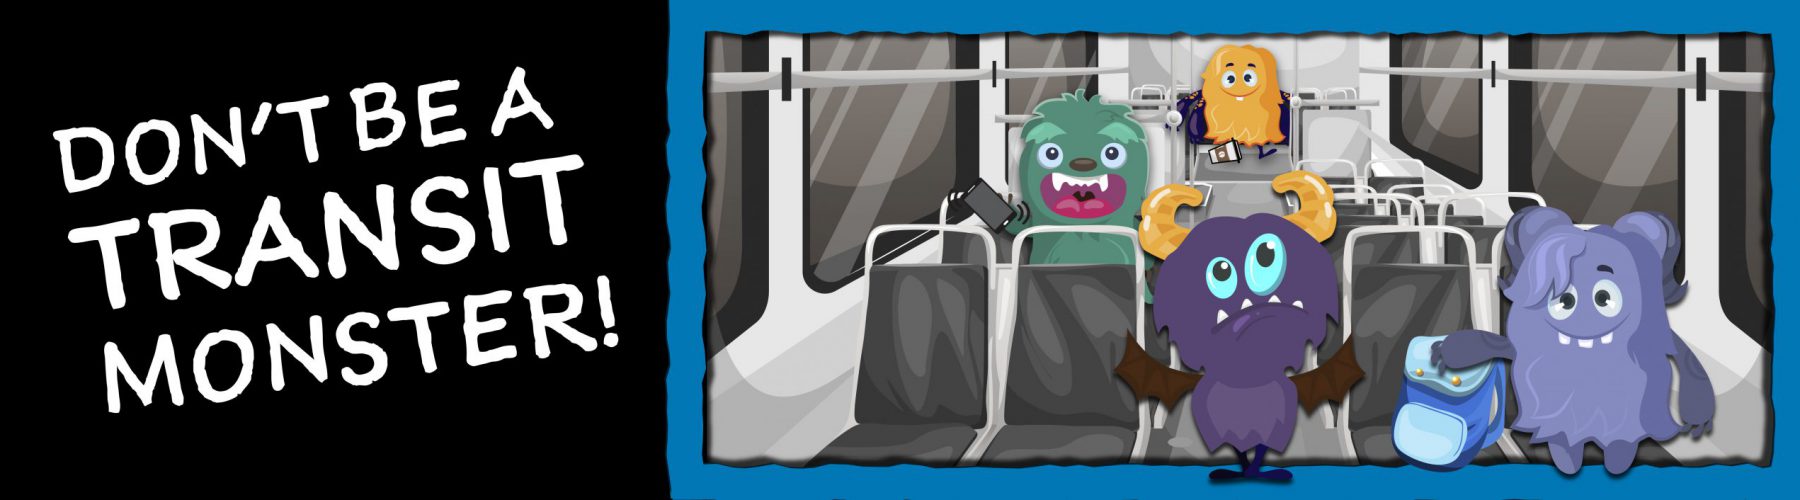 Don't Be a Transit Monster - Click here to find out about the transit monsters spotted on transit and how to not be one while riding.